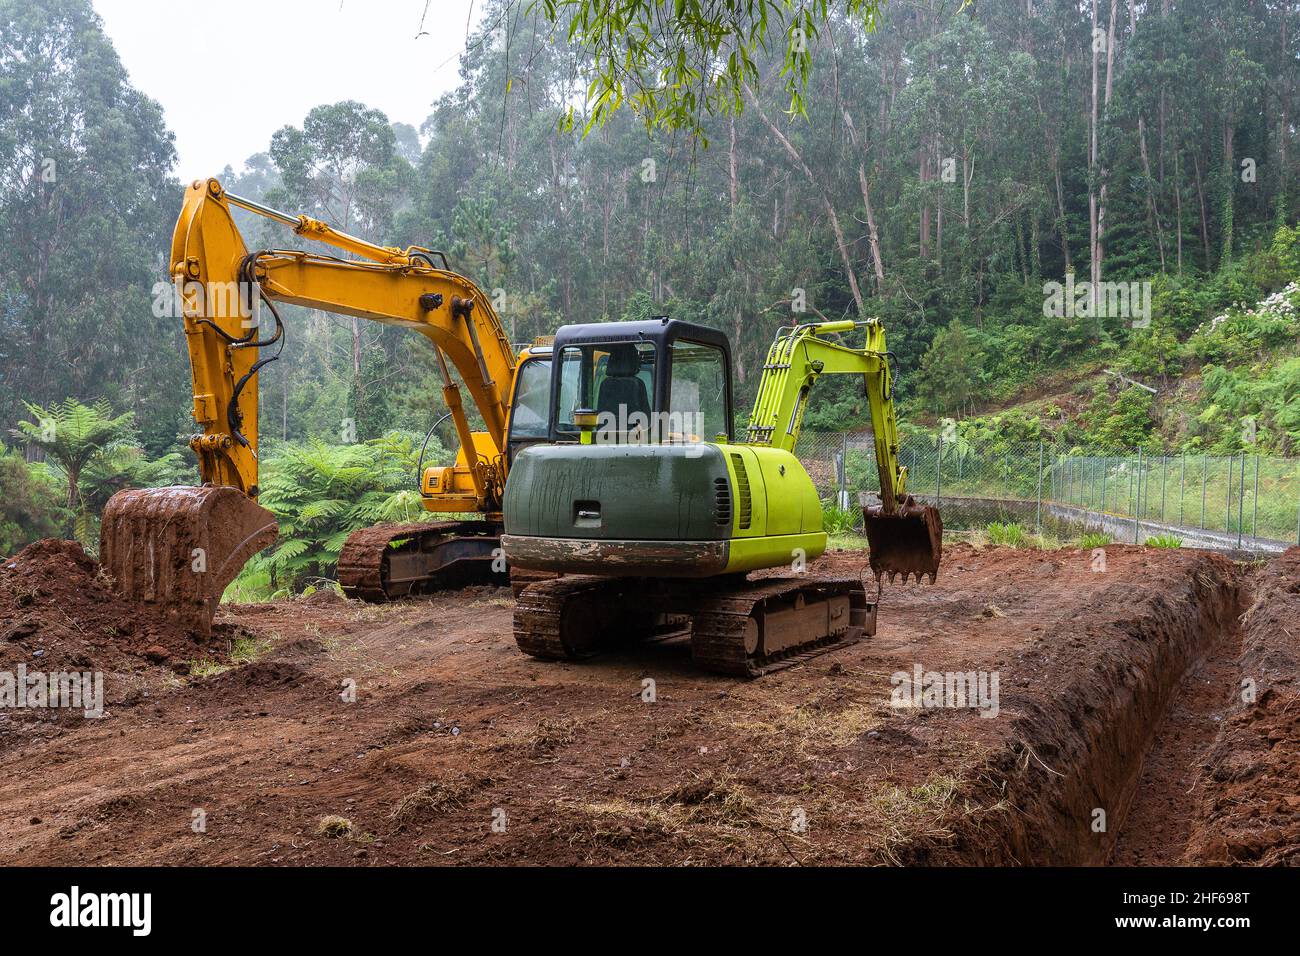 Two excavators working in Madeira island, Portugal. Stock Photo